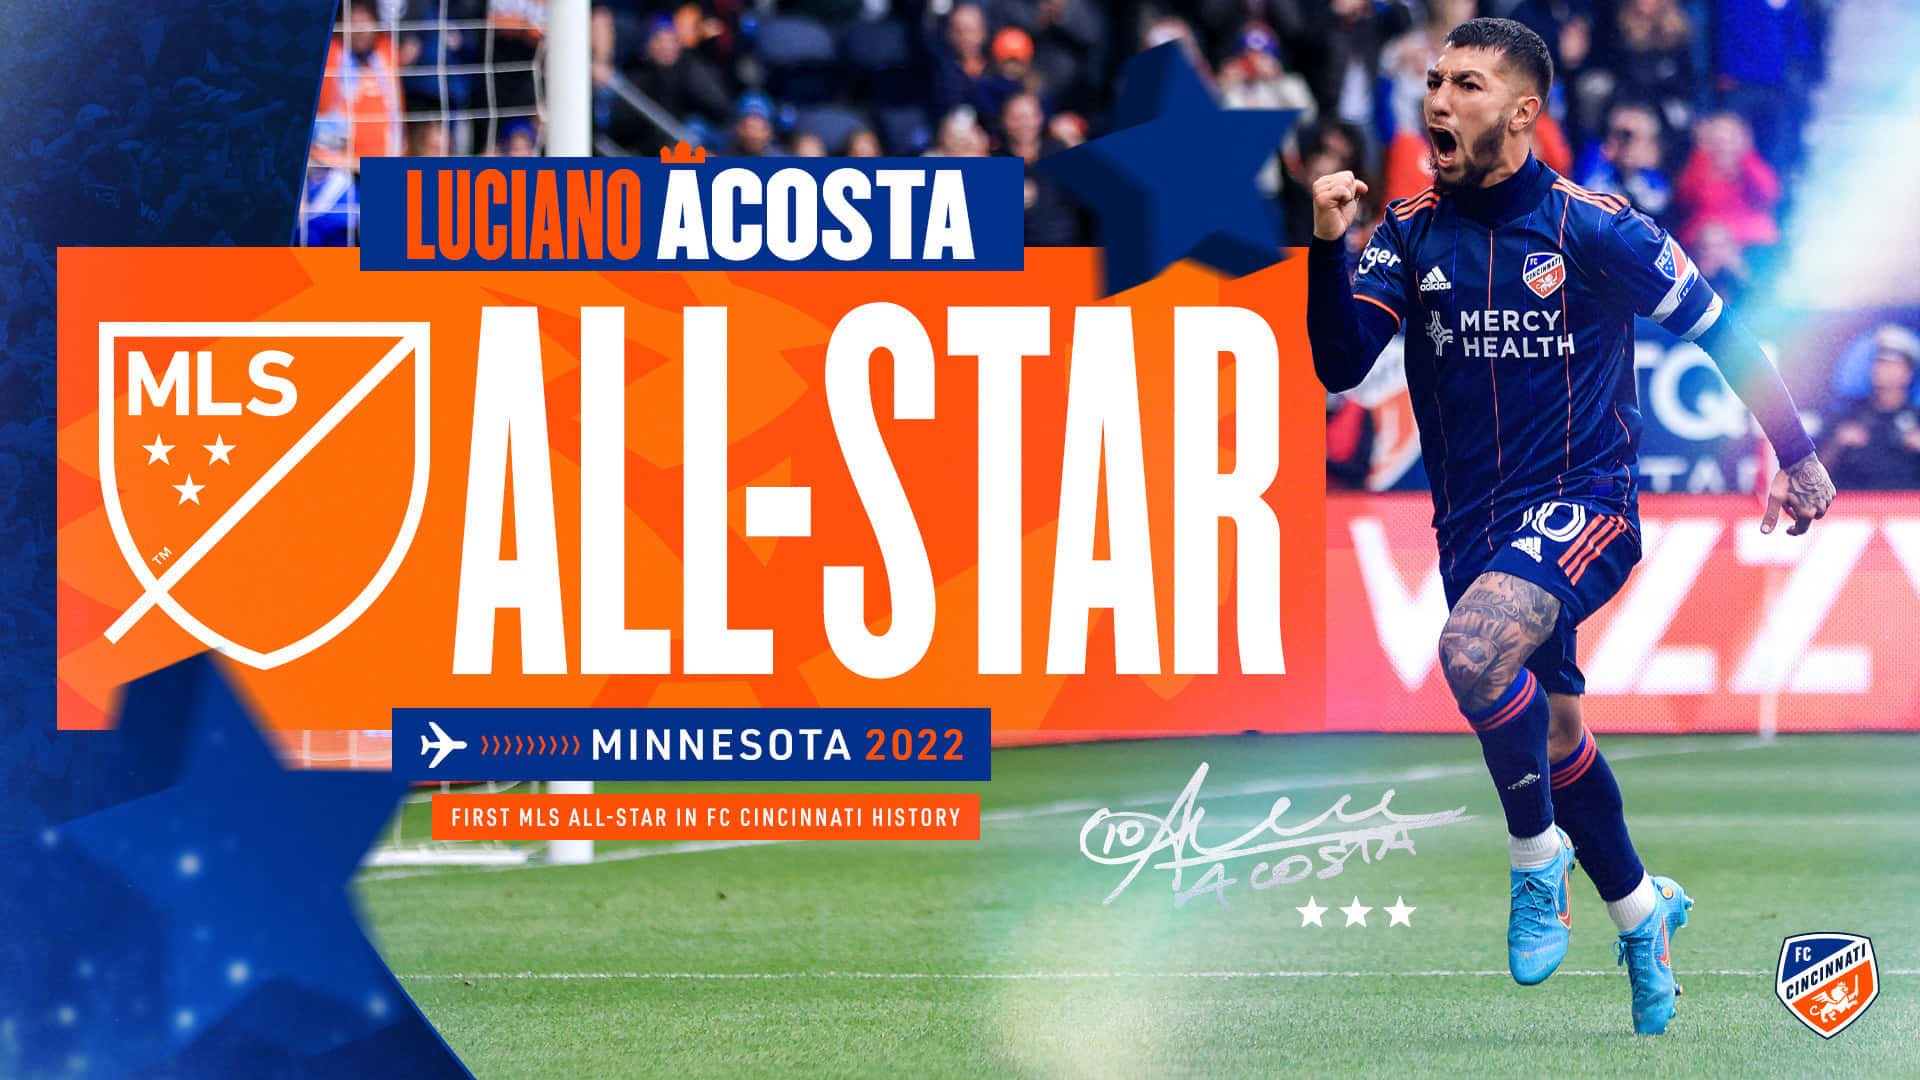 "Luciano Acosta in Intense Soccer Action during the 2022 All-Star Game" Wallpaper